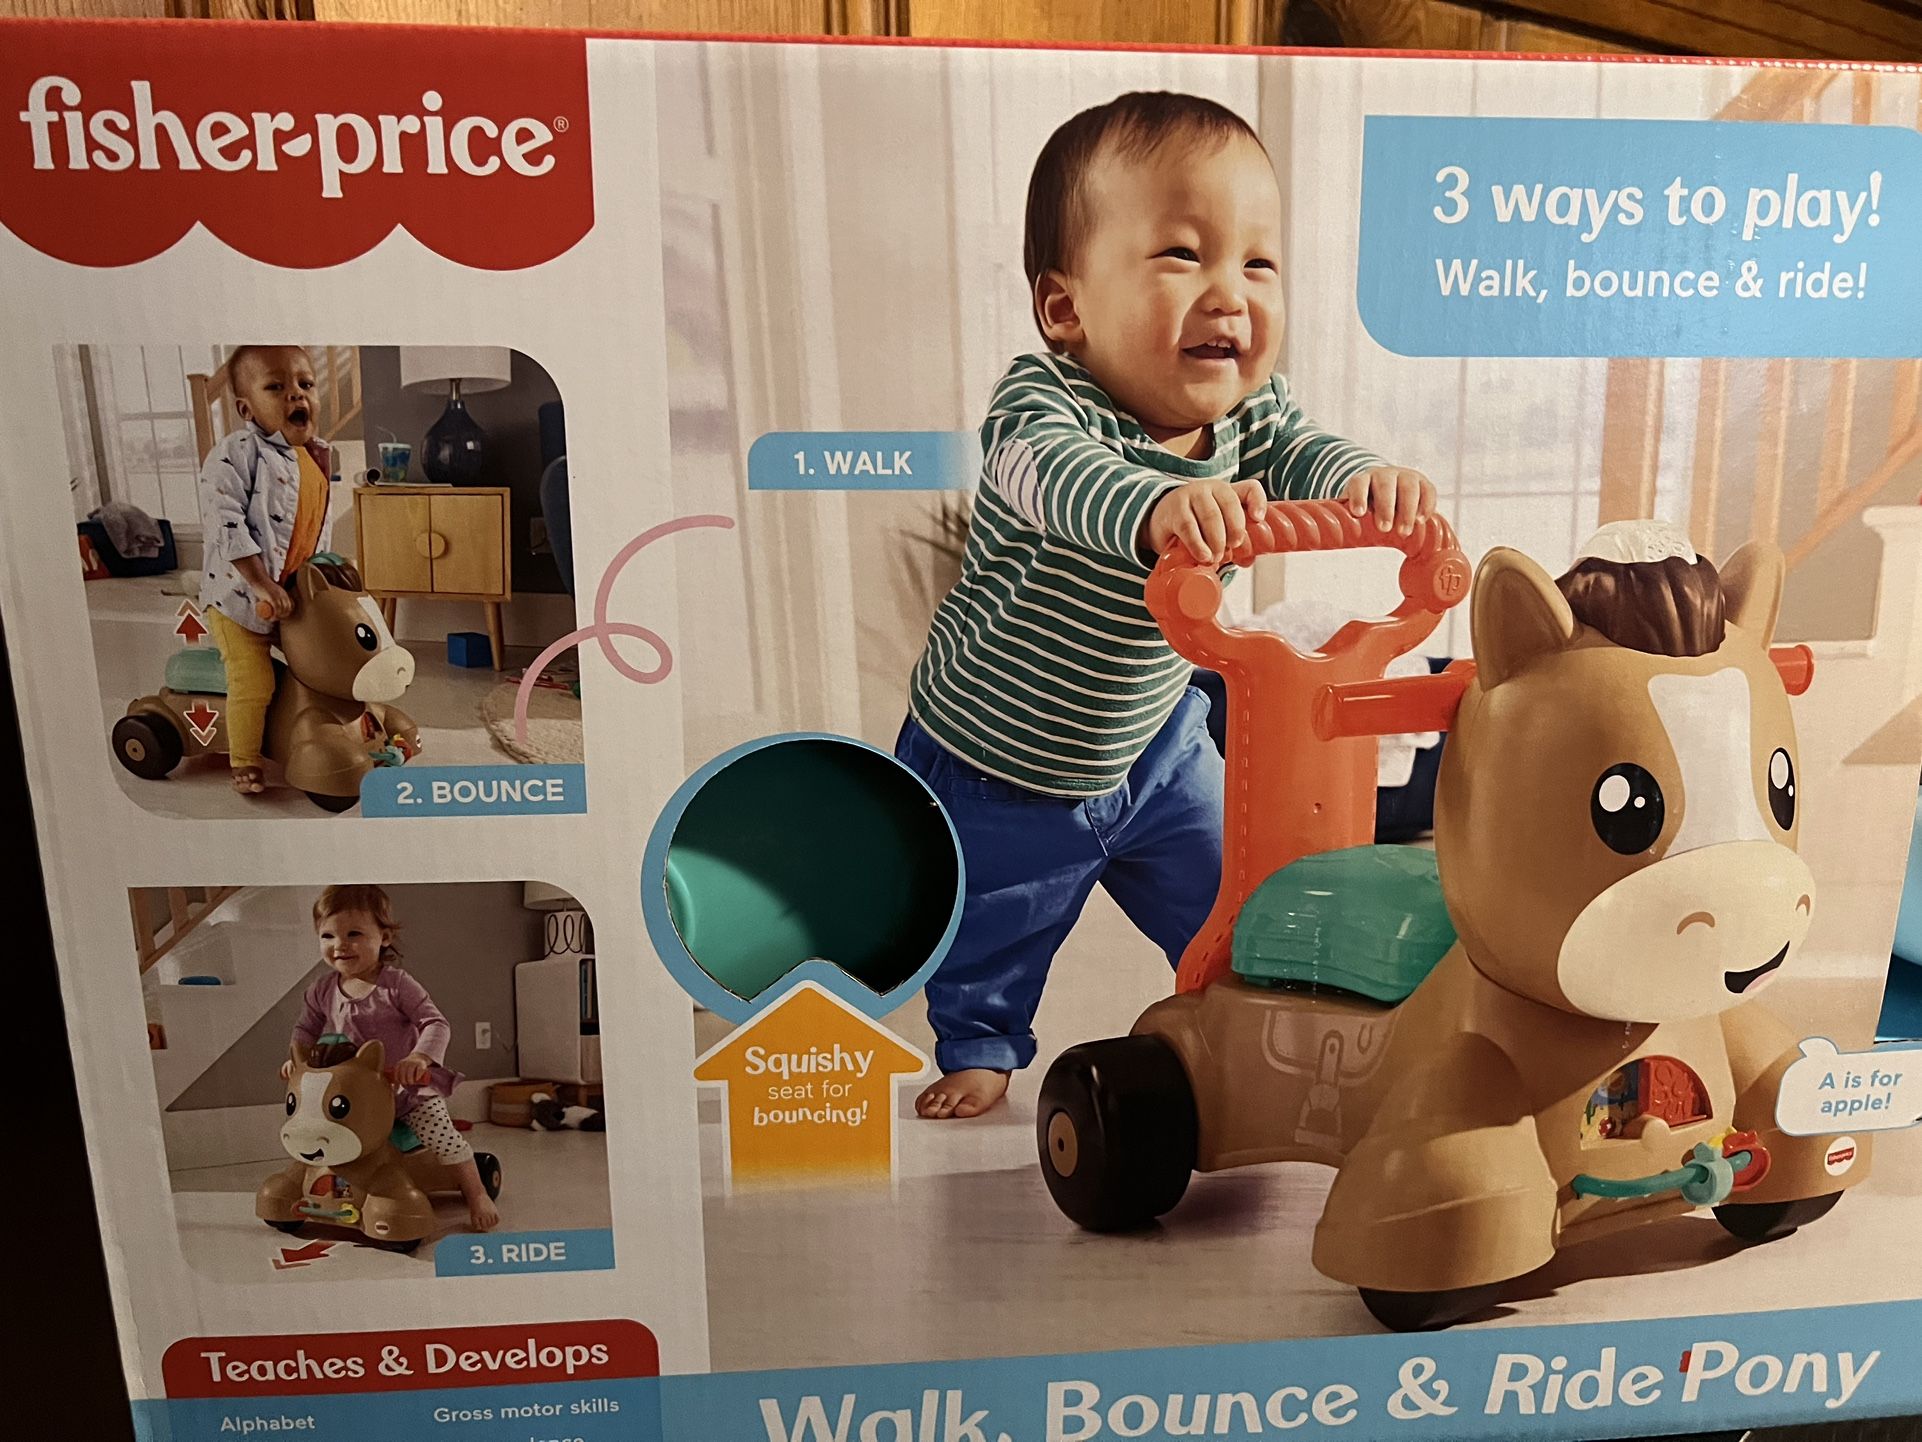 Fisher-Price Baby 3 Ways to Play for Toddlers: Walk, Bounce and Ride a Pony..NEW 